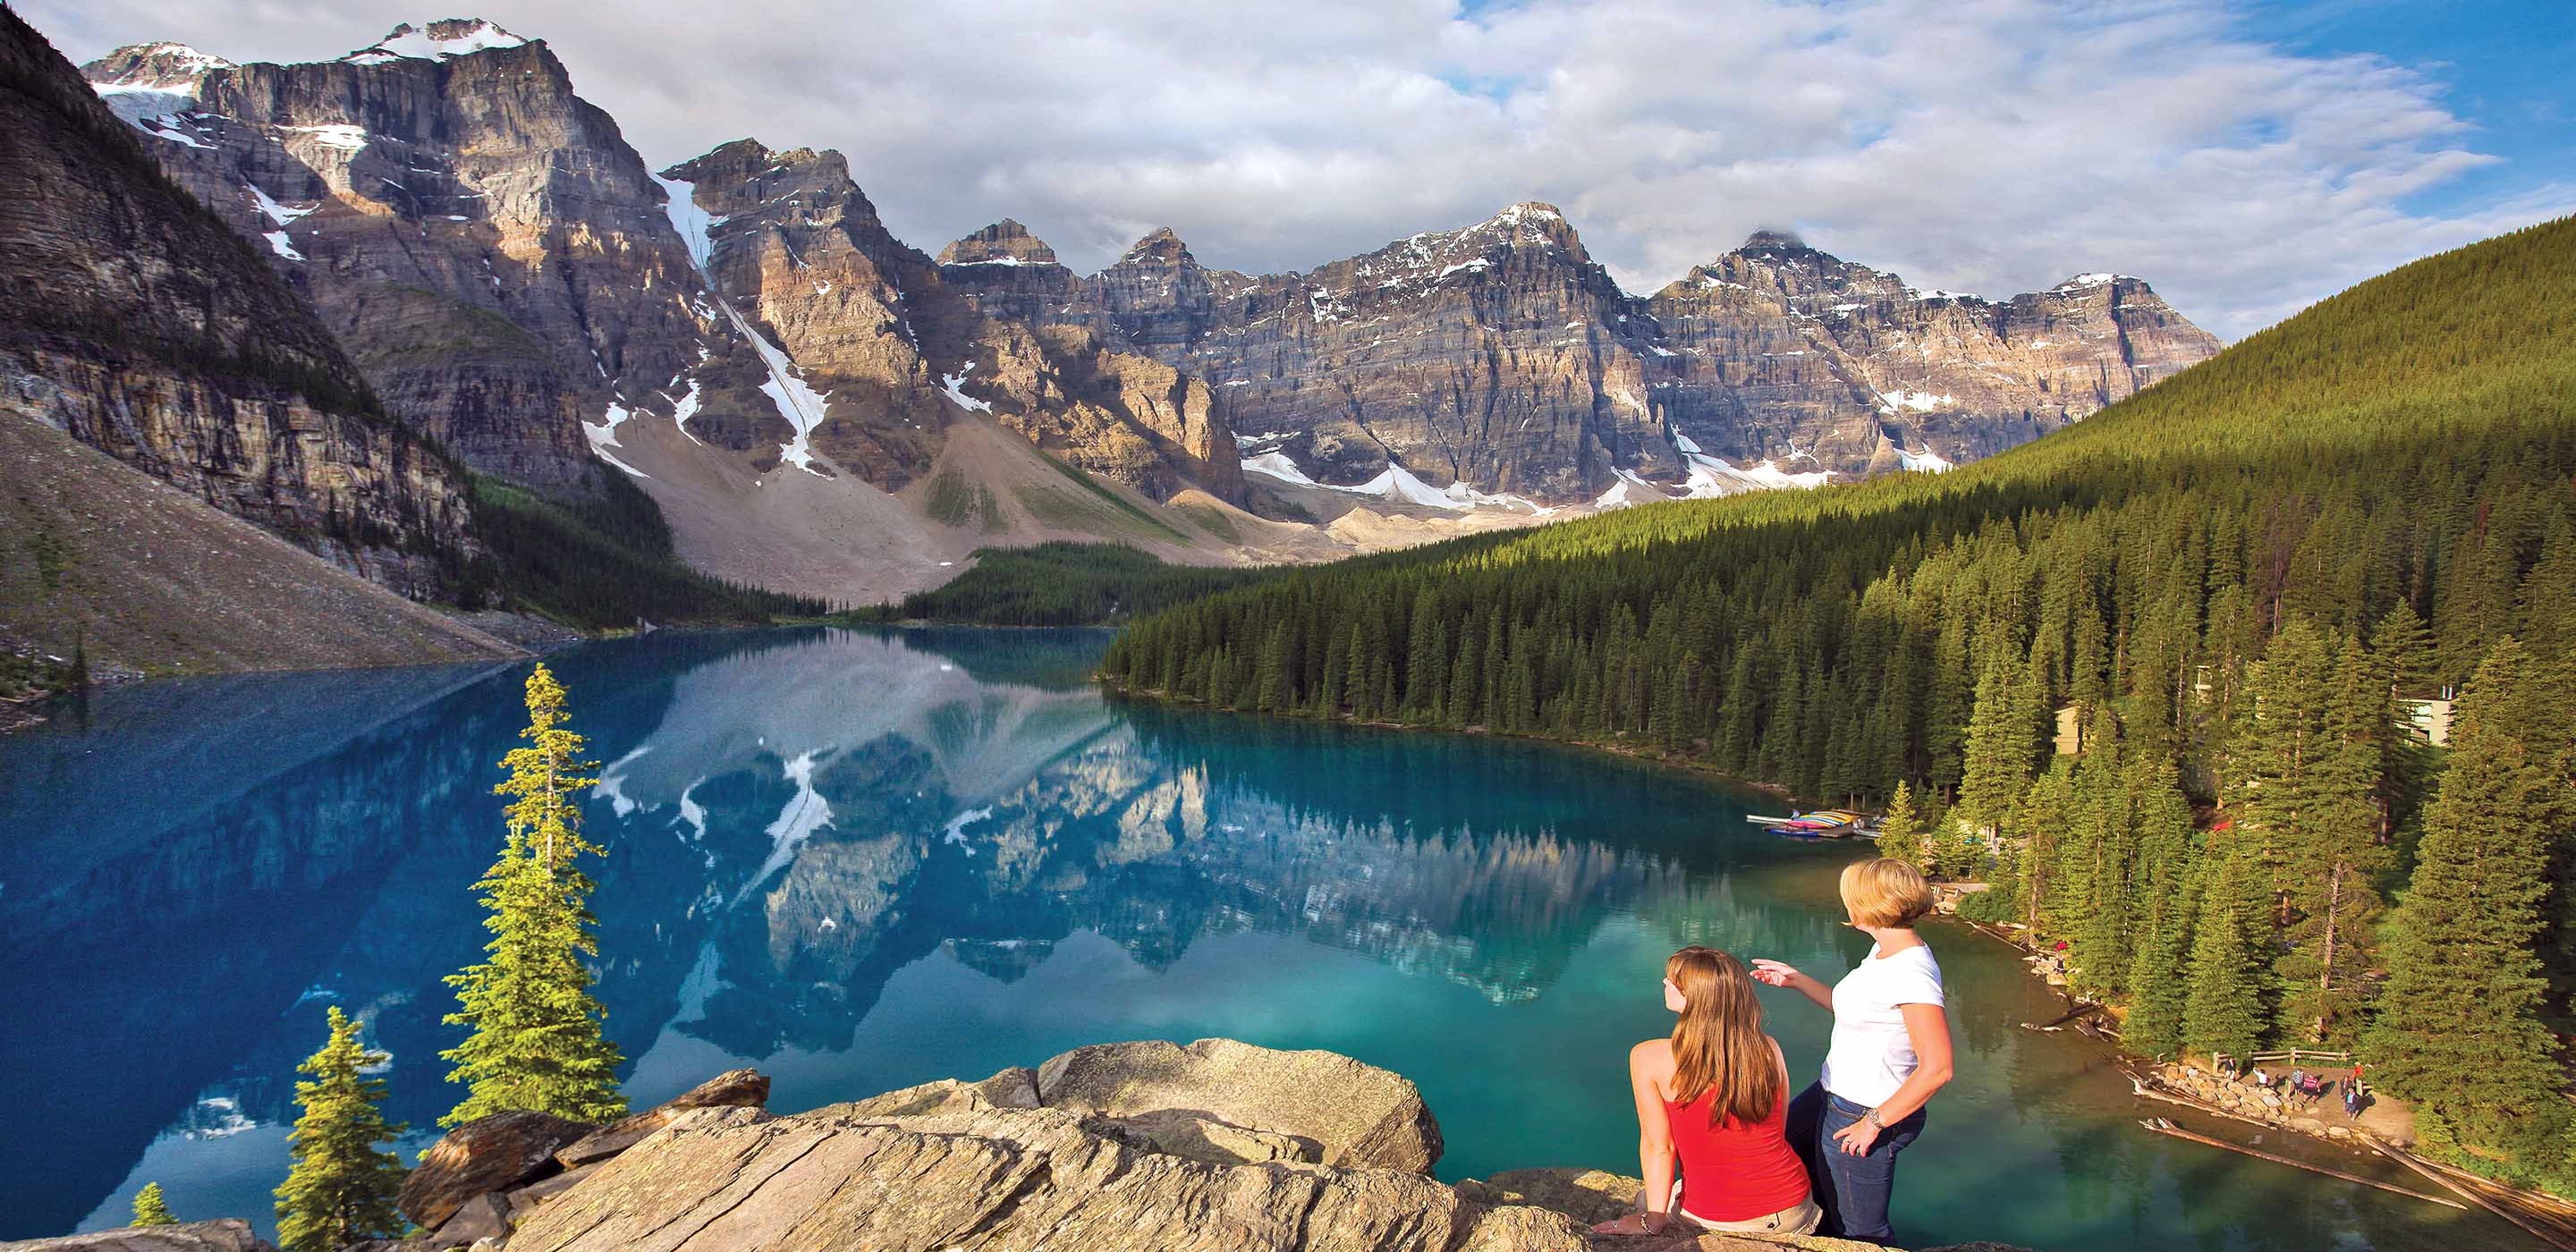 thomas cook canada tour packages